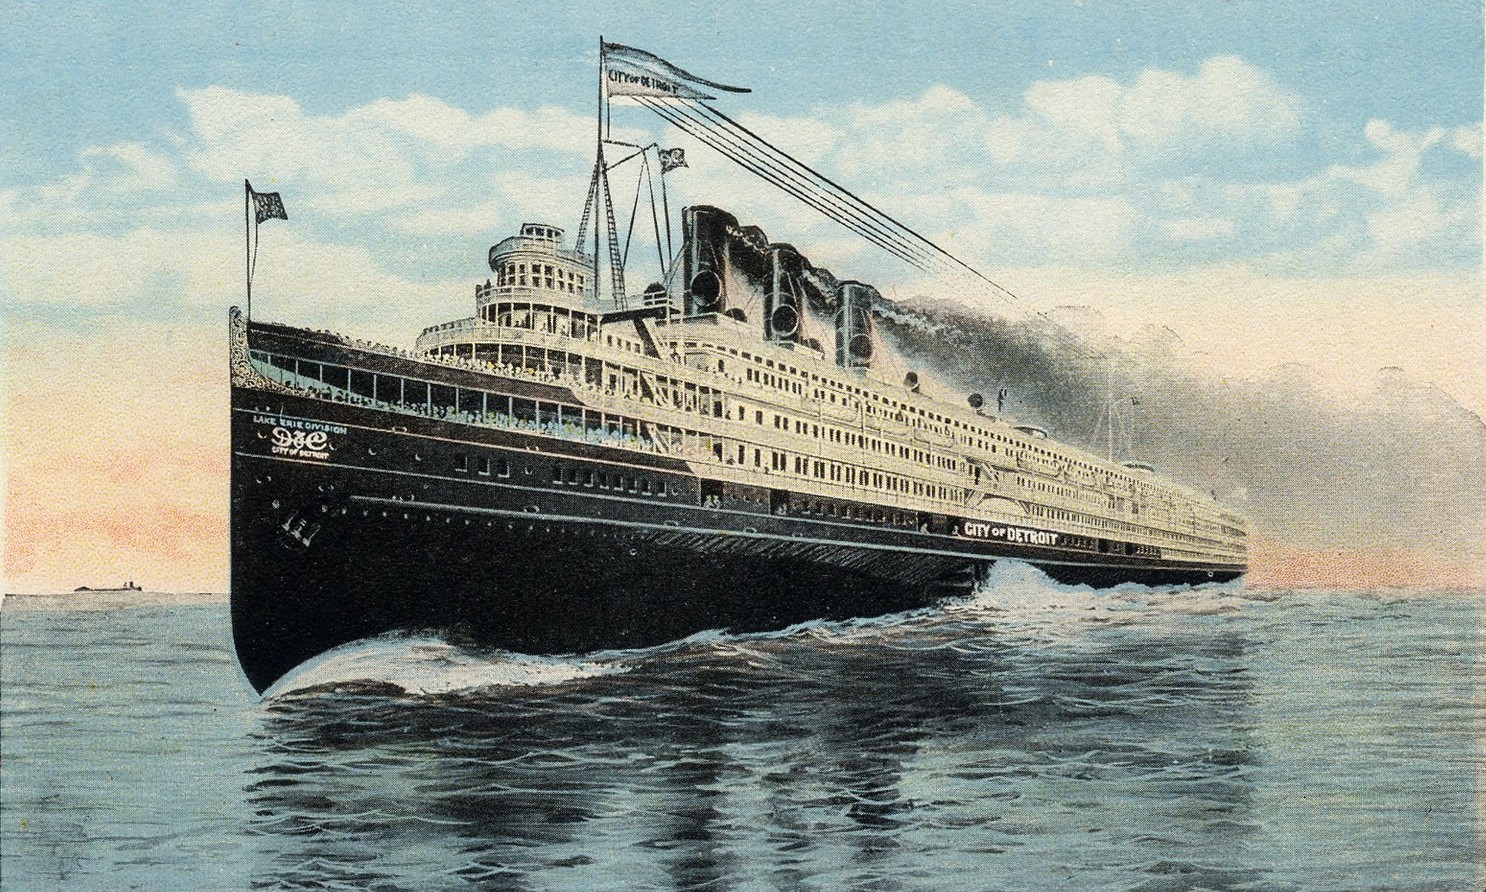 The steamship City of Syracuse 